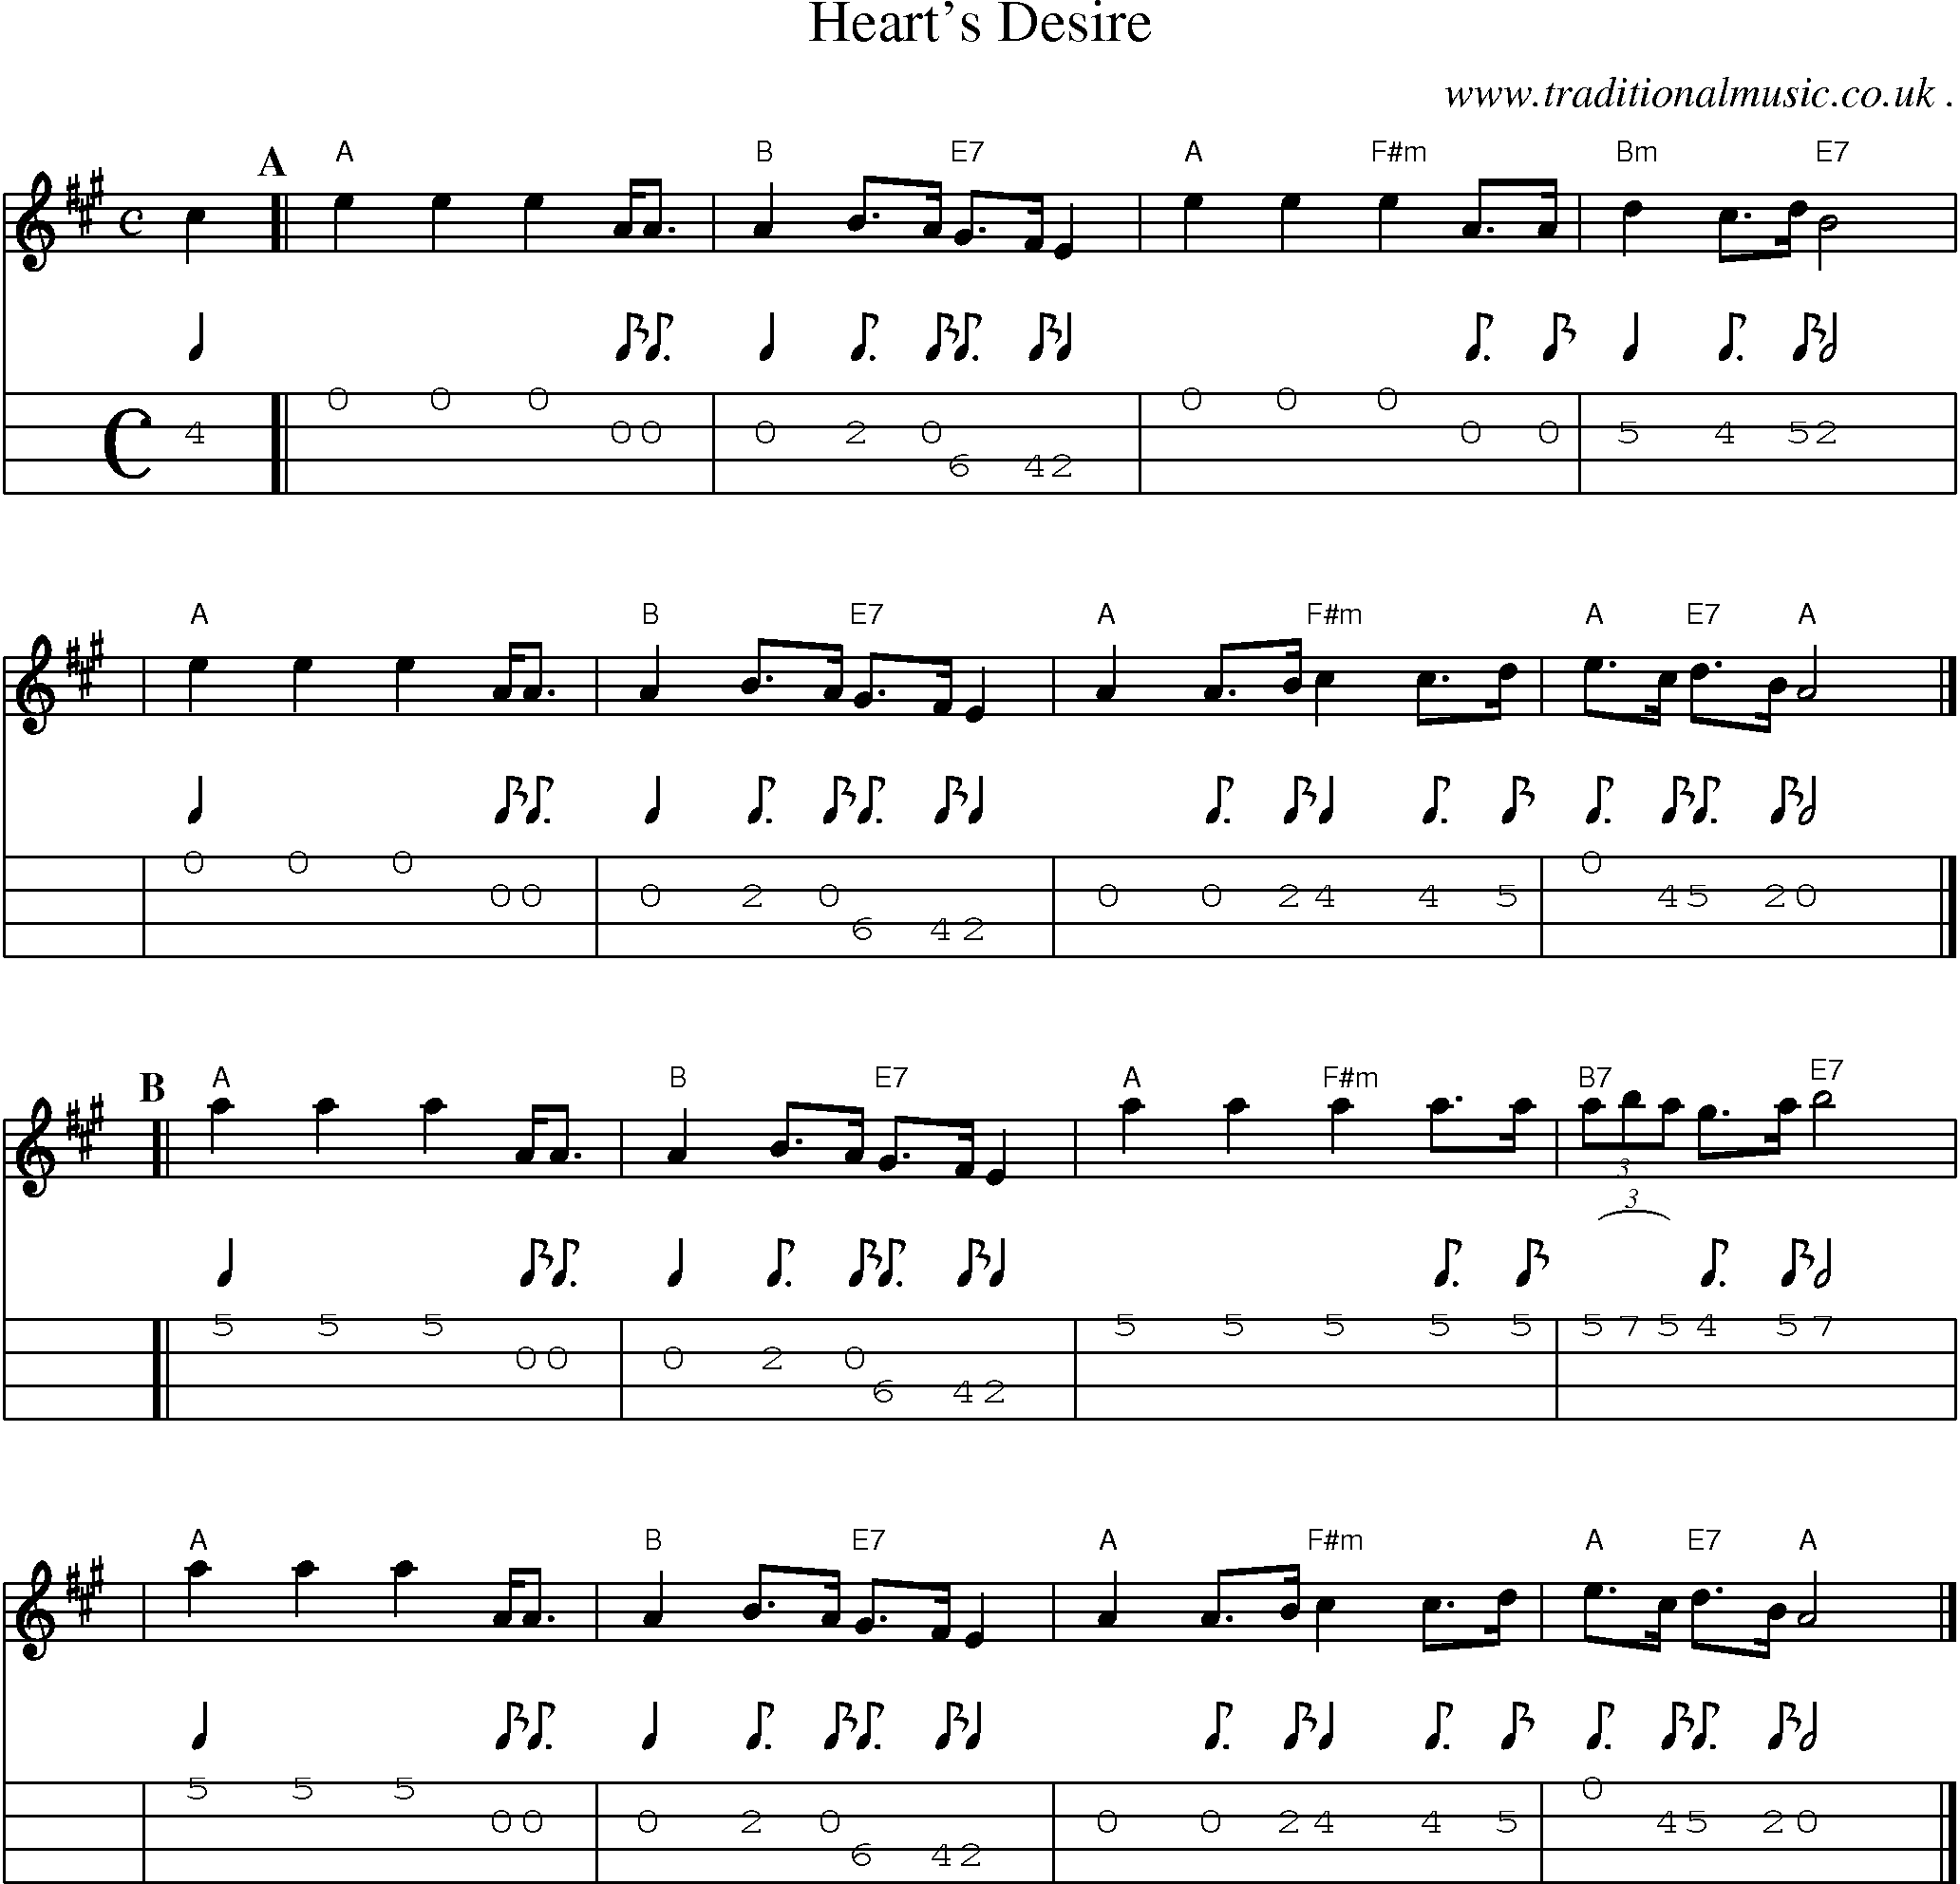 Sheet-music  score, Chords and Mandolin Tabs for Hearts Desire